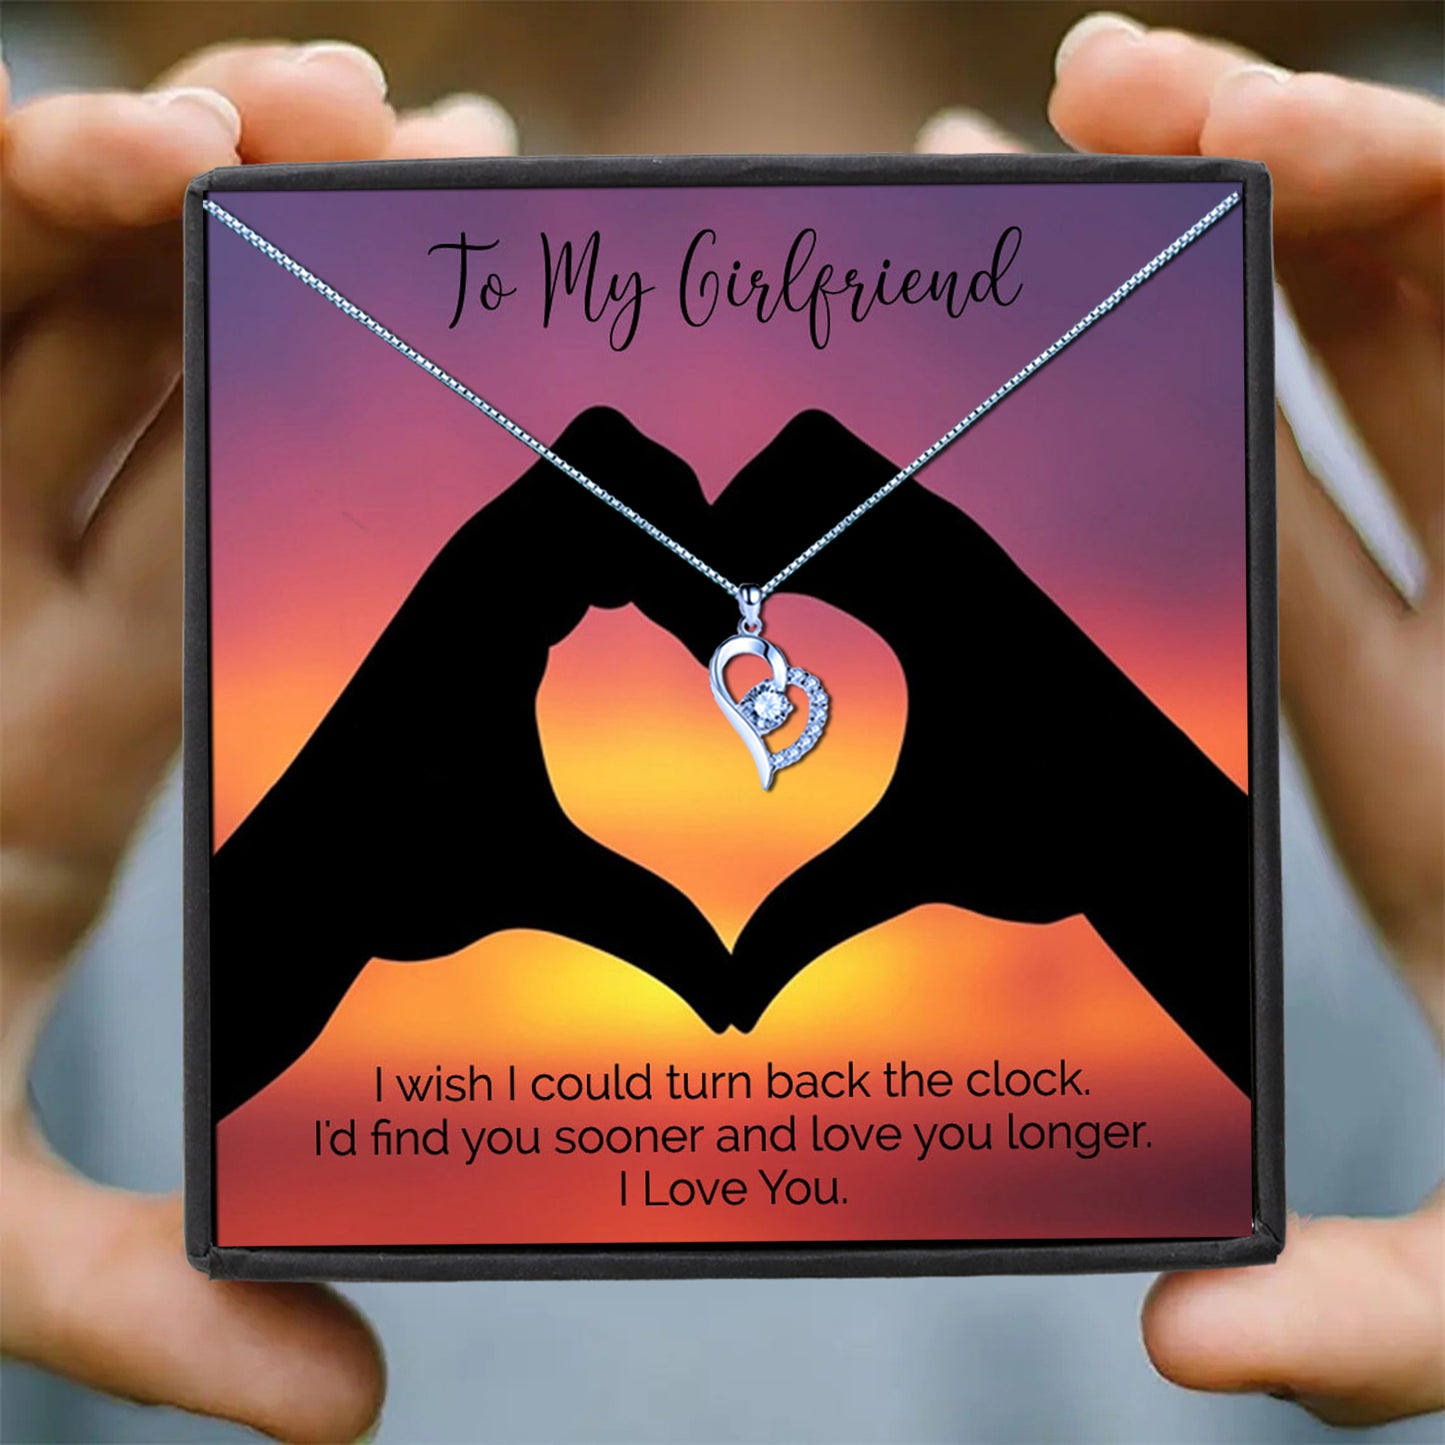 To My Girlfriend - Sunset Heart Message Necklaces